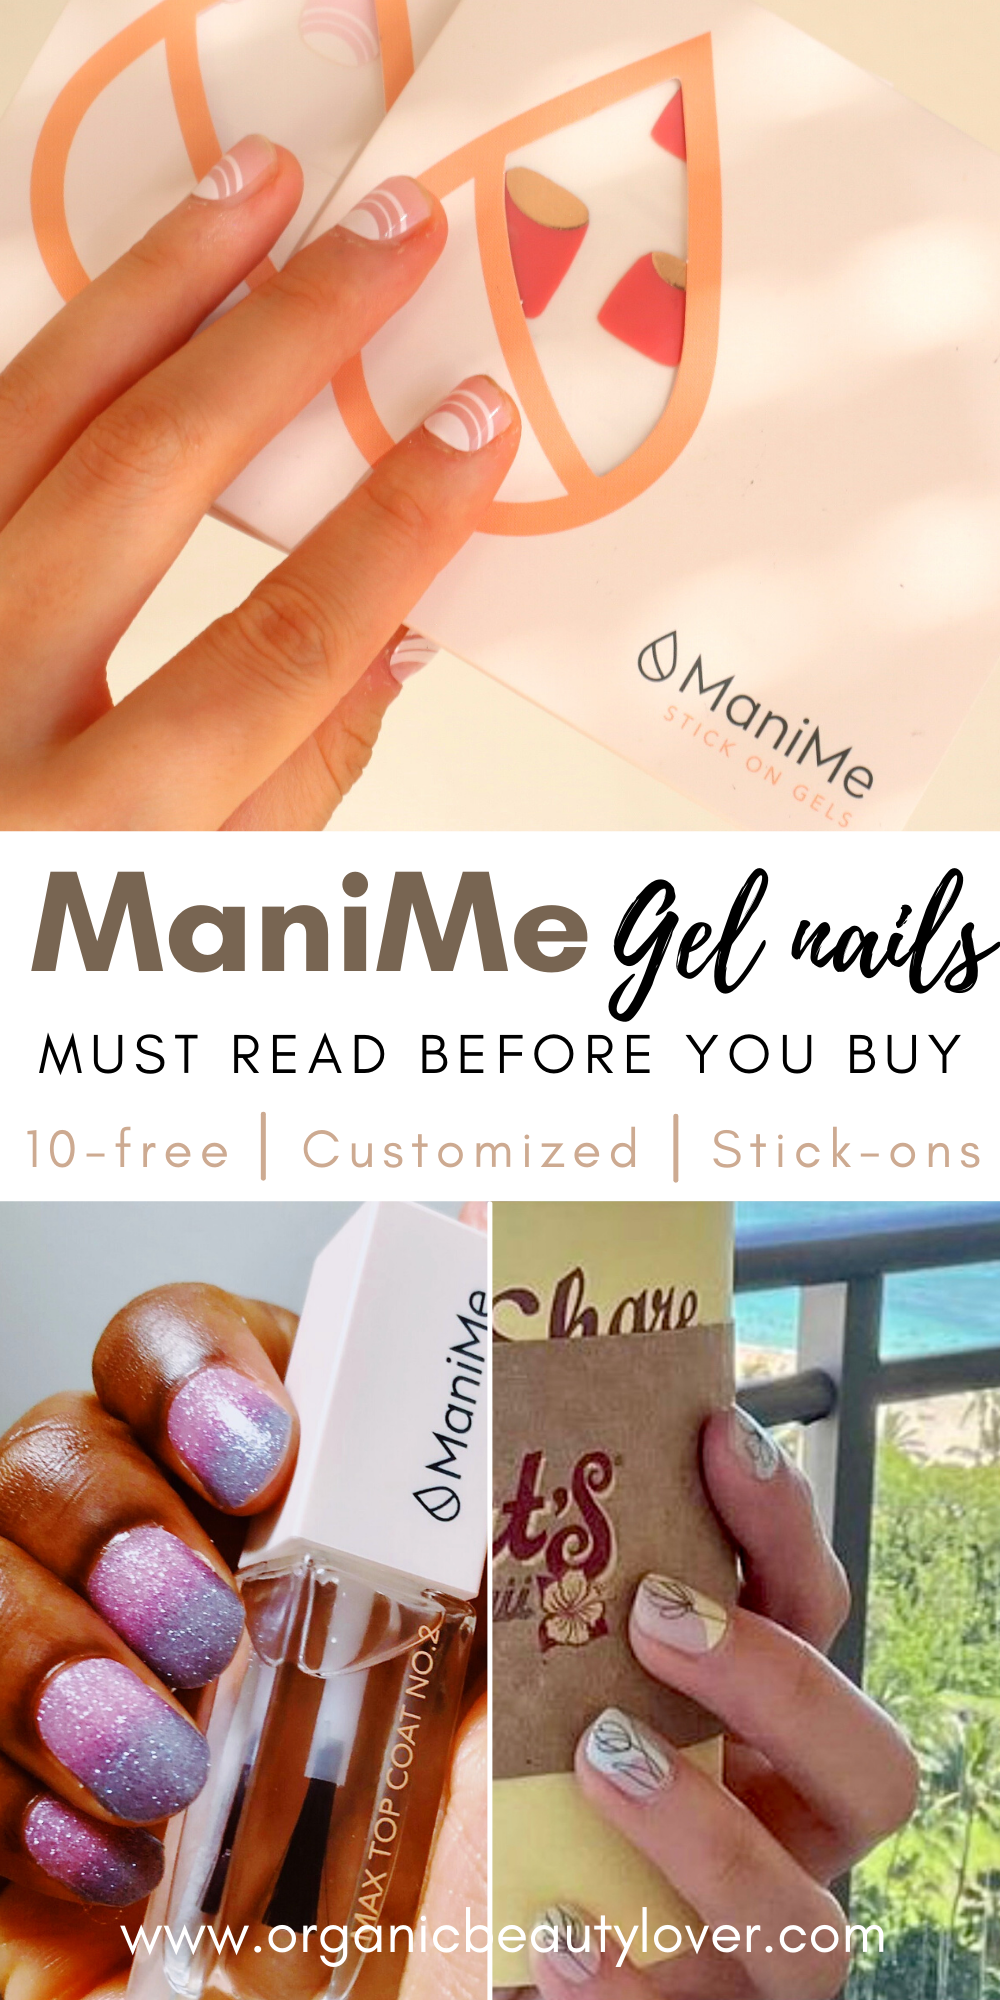 Manime gel nails review